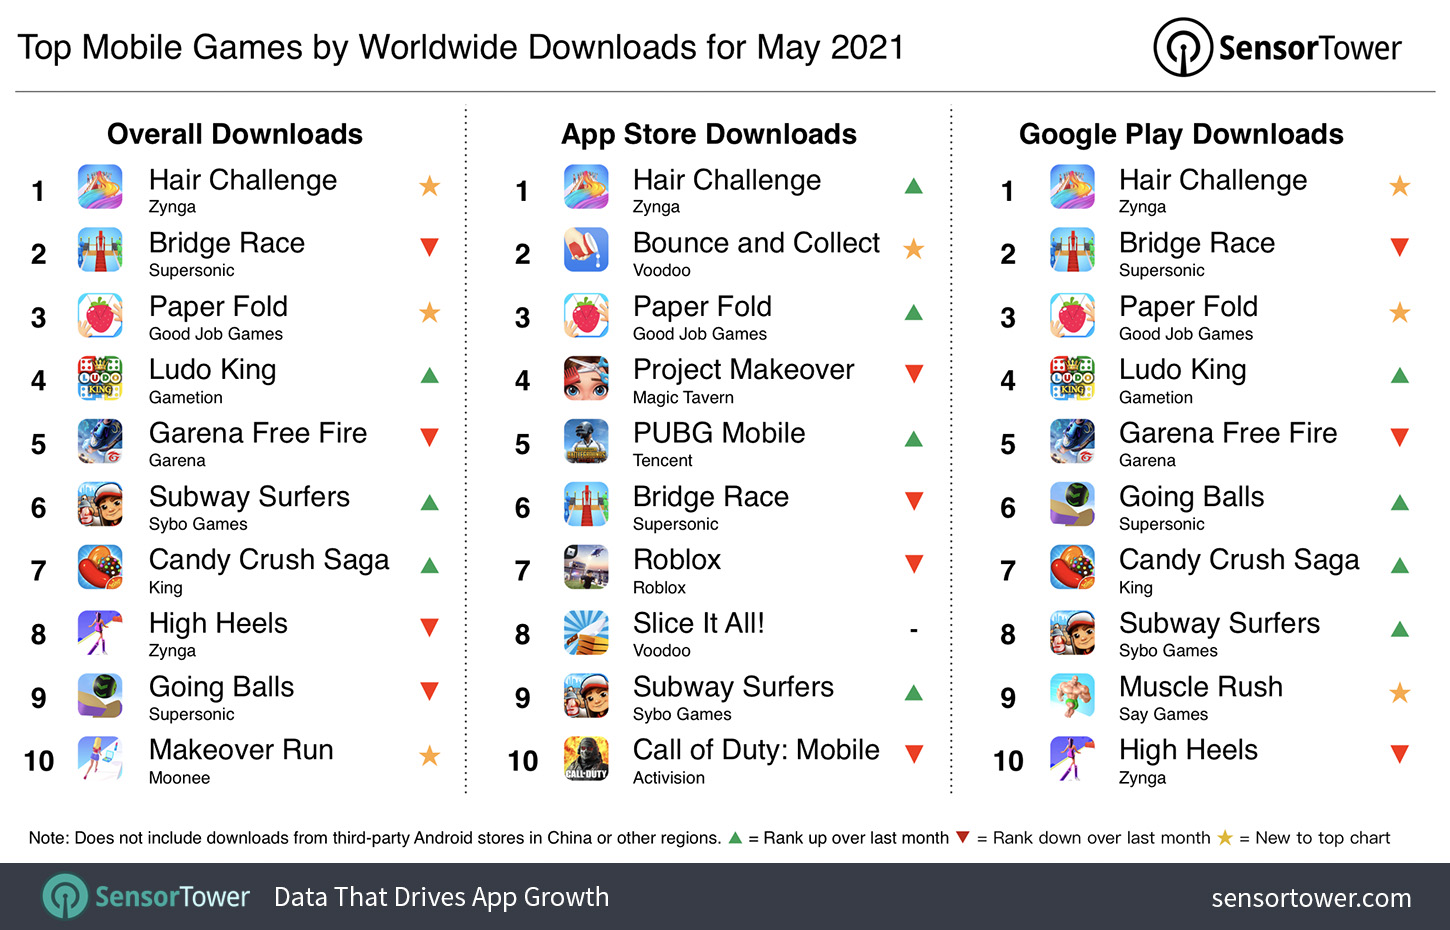 Top Mobile Games Worldwide for May 2021 by Downloads